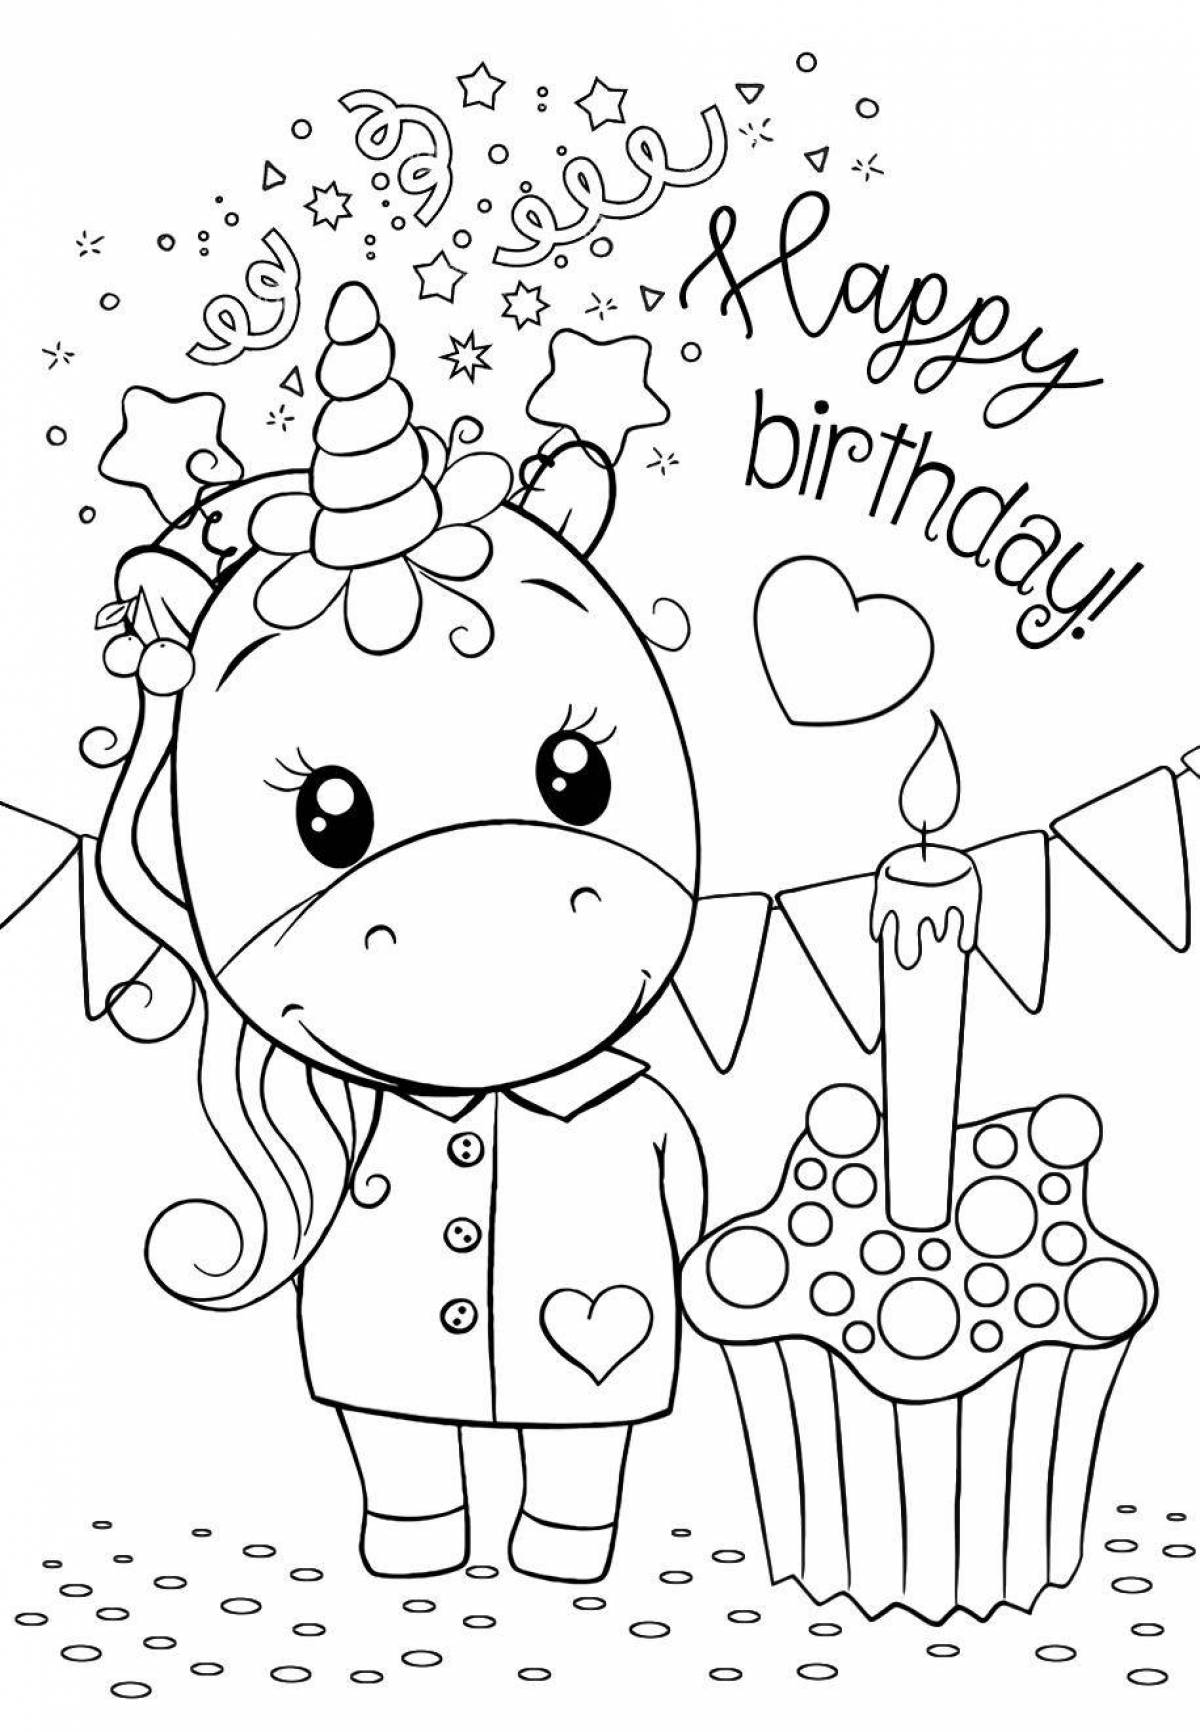 Color-frenzy happy birthday sister coloring page